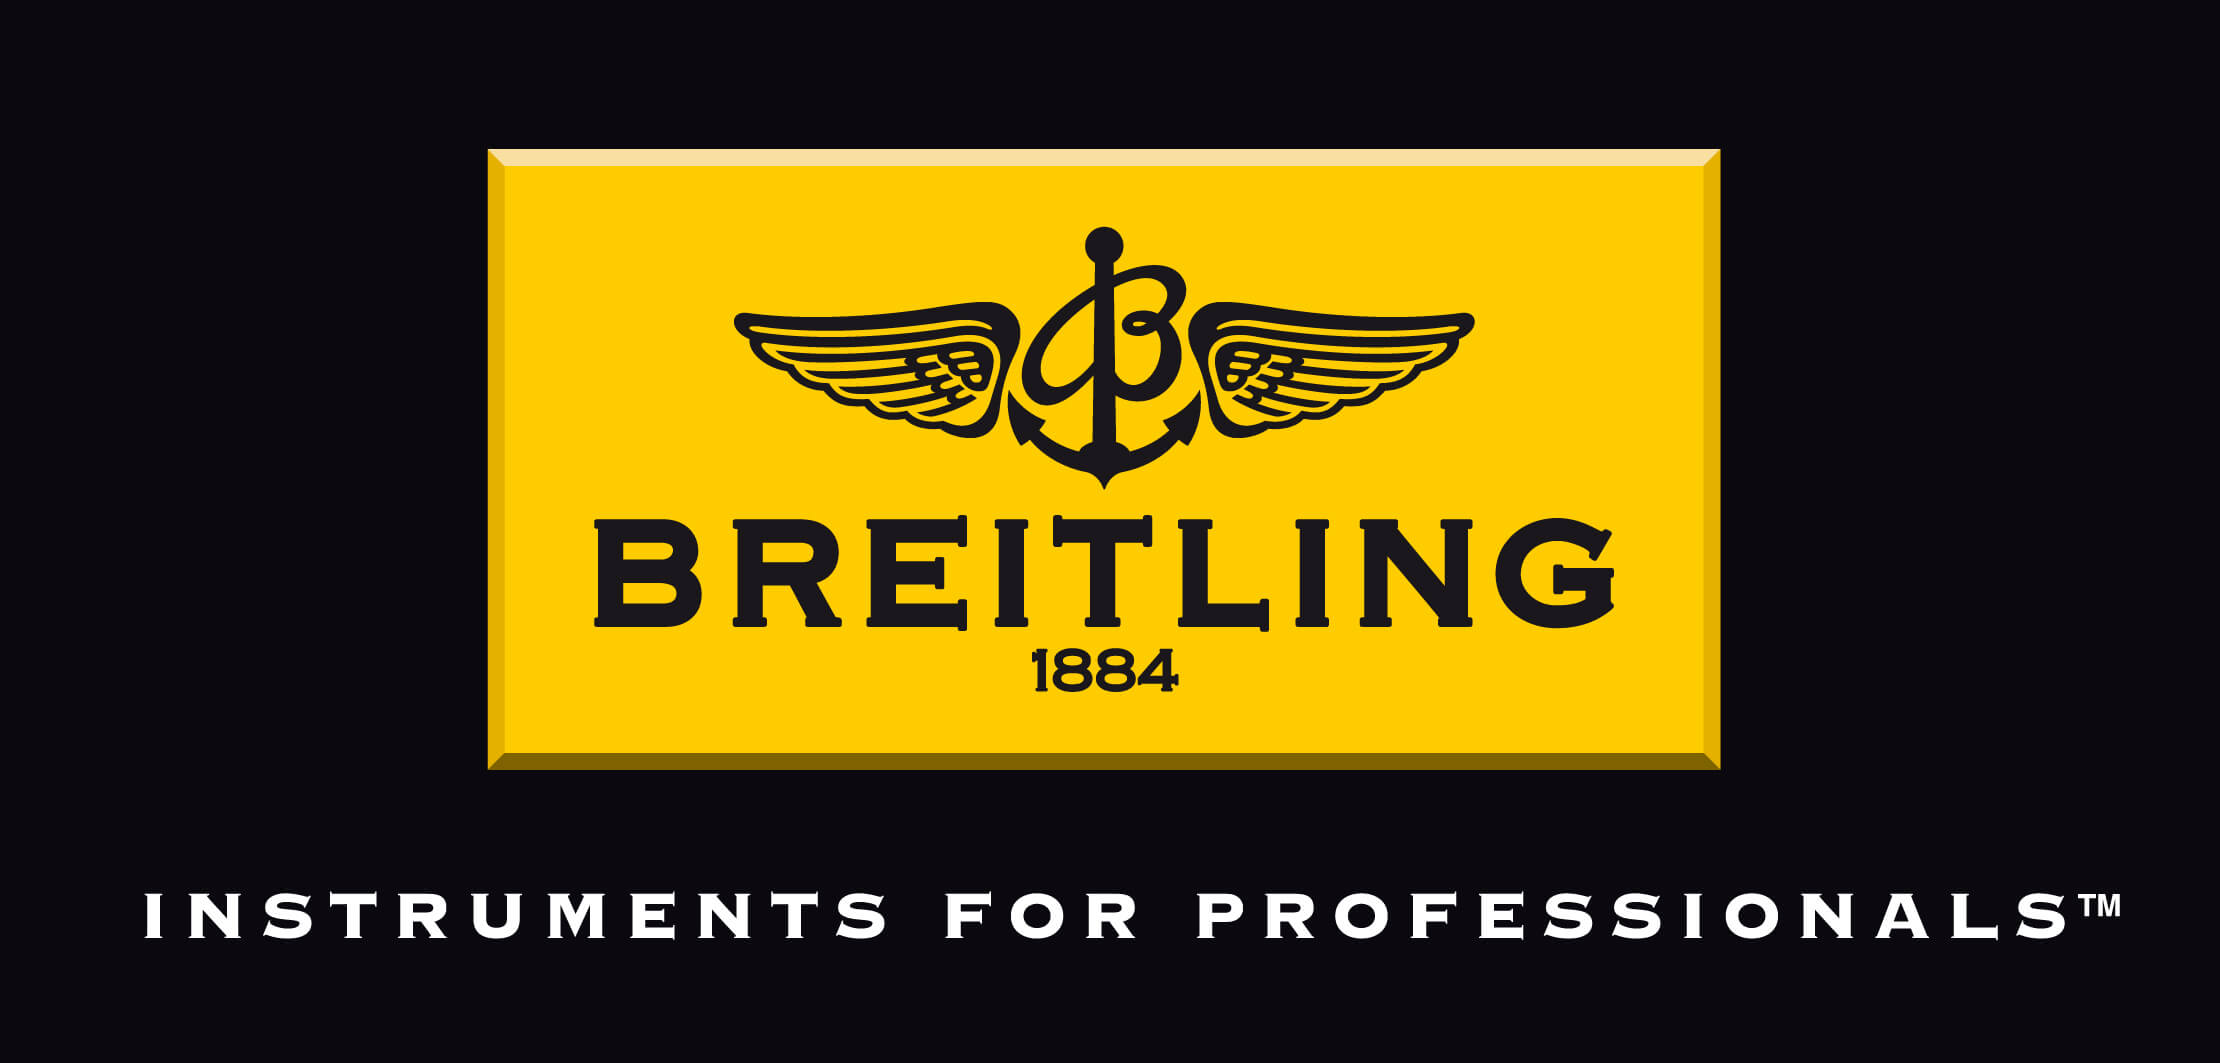 Lewis Jewelers Announces Addition of Breitling Swiss-Made Timepieces